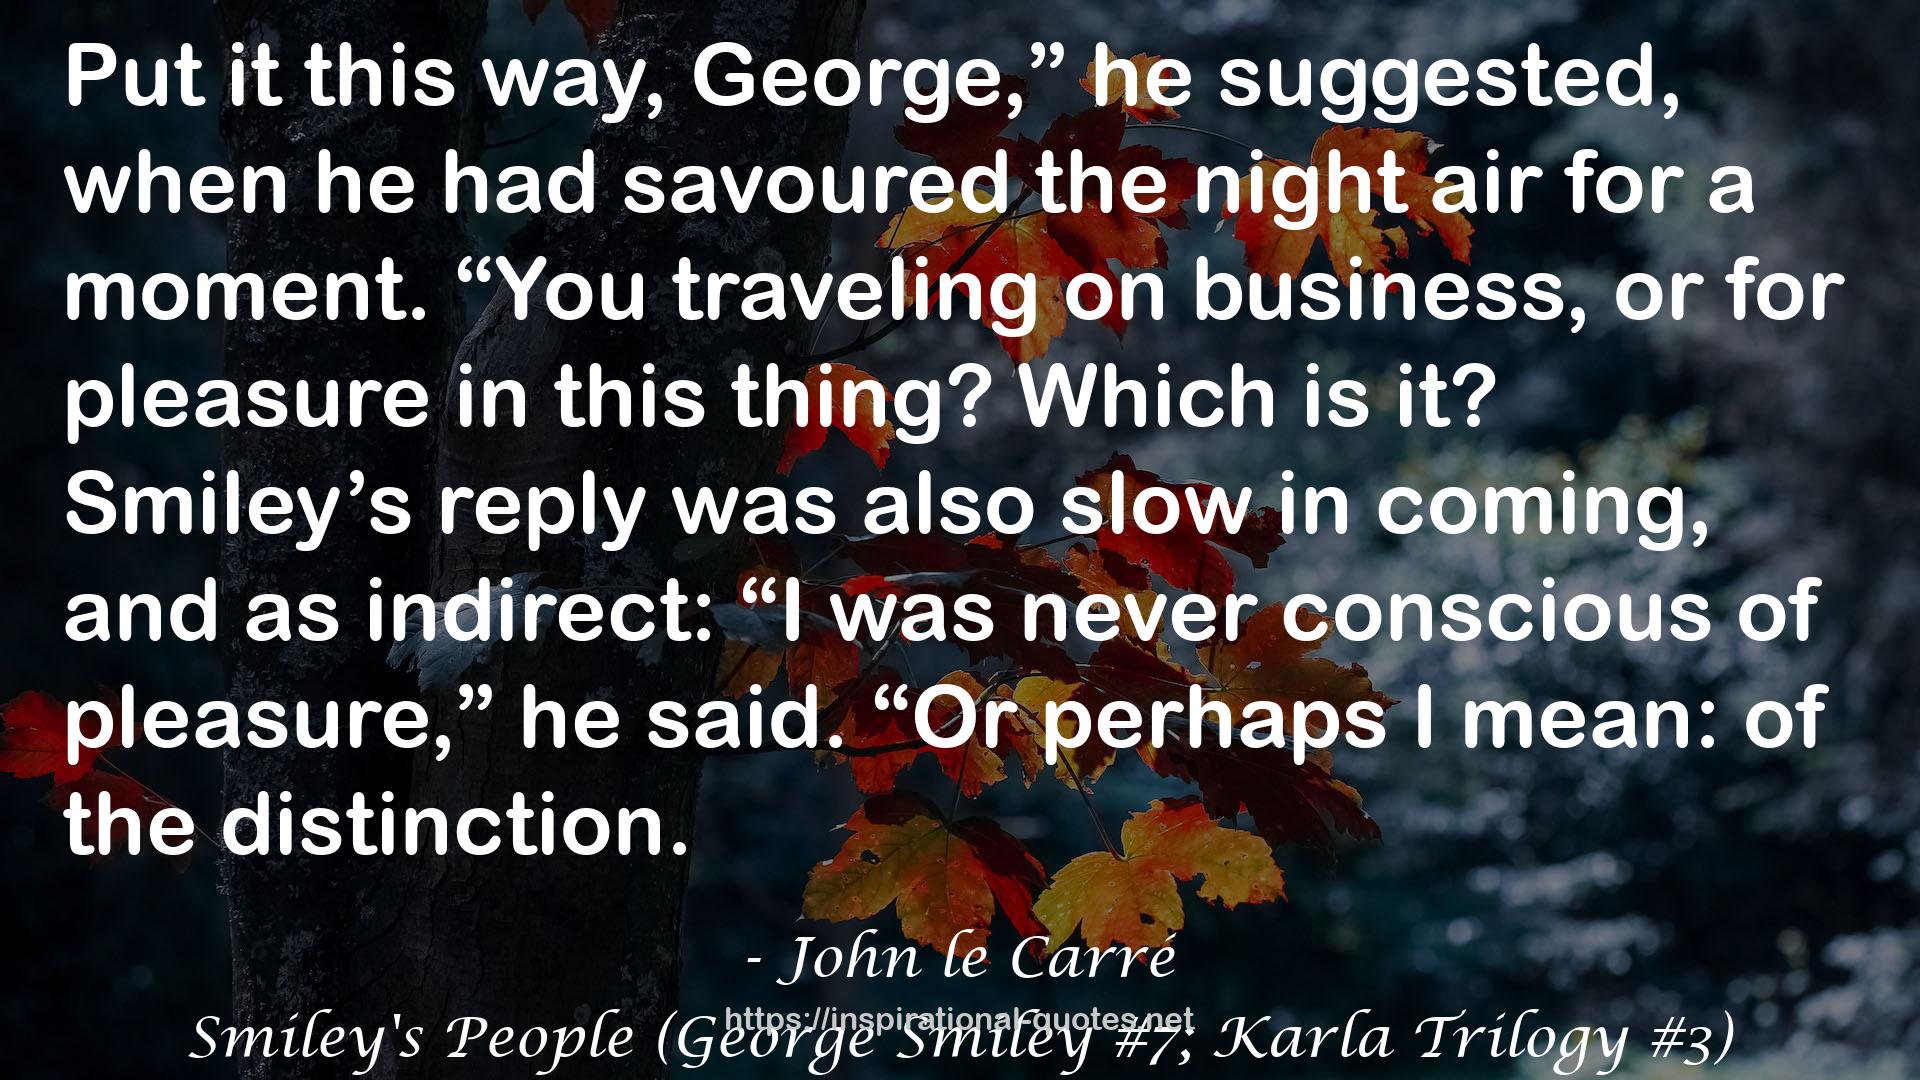 Smiley's People (George Smiley #7; Karla Trilogy #3) QUOTES